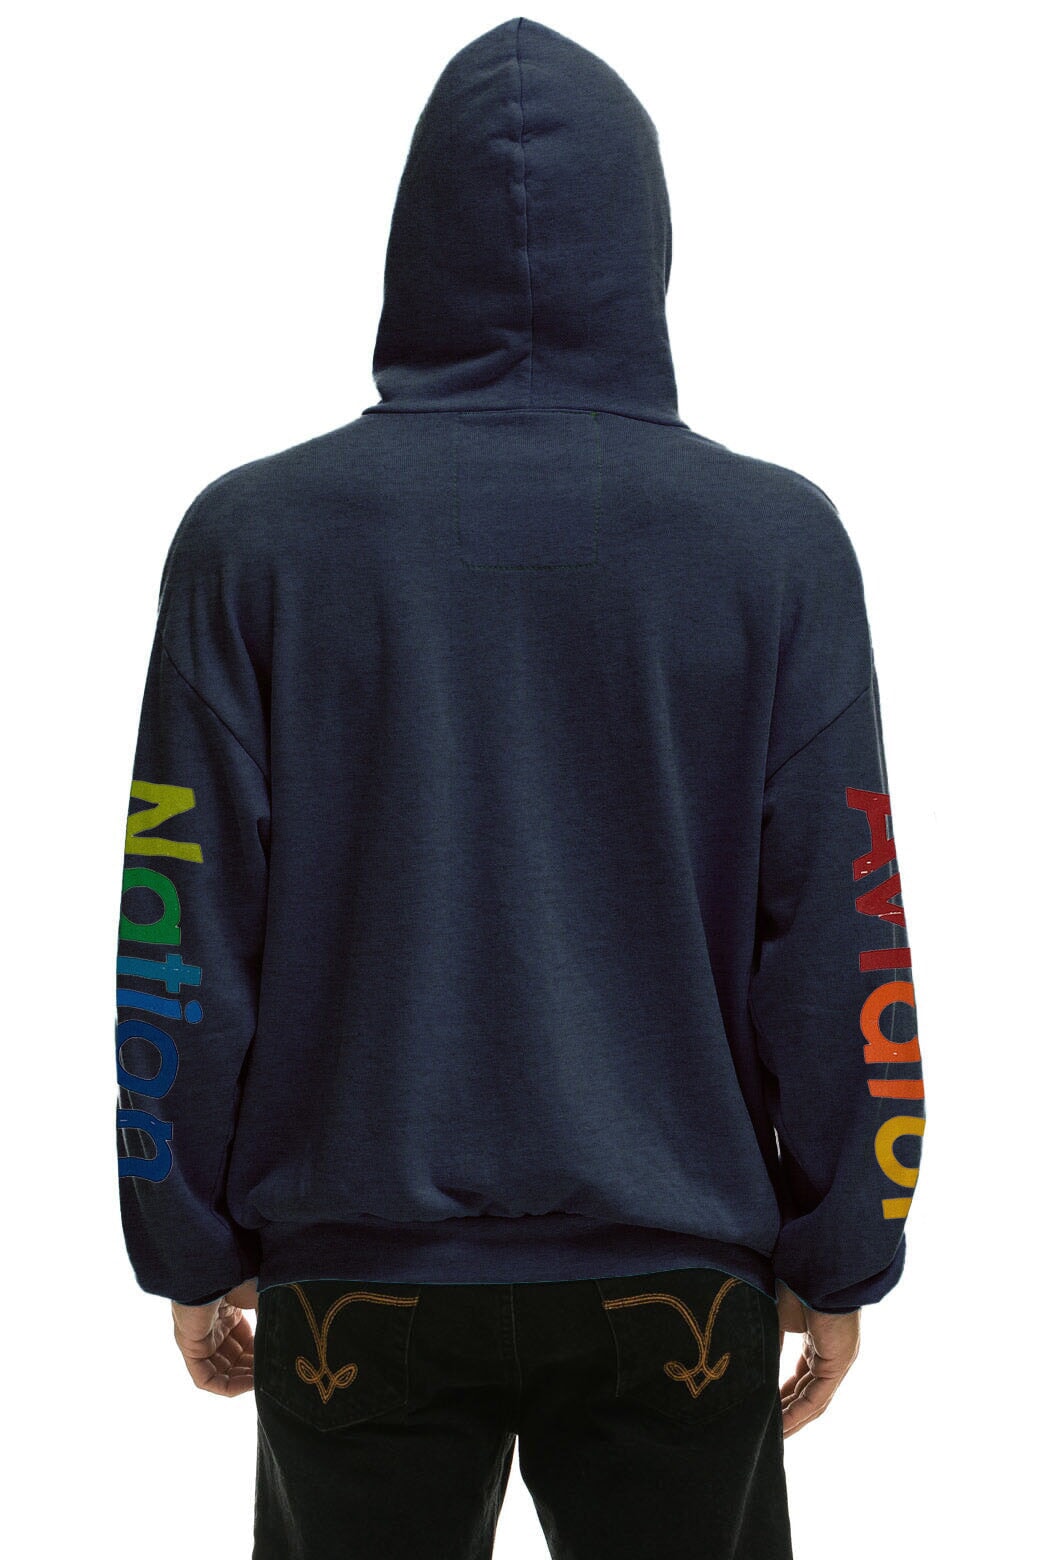 AVIATOR NATION AUSTIN RELAXED PULLOVER HOODIE - NAVY Hoodie Aviator Nation 